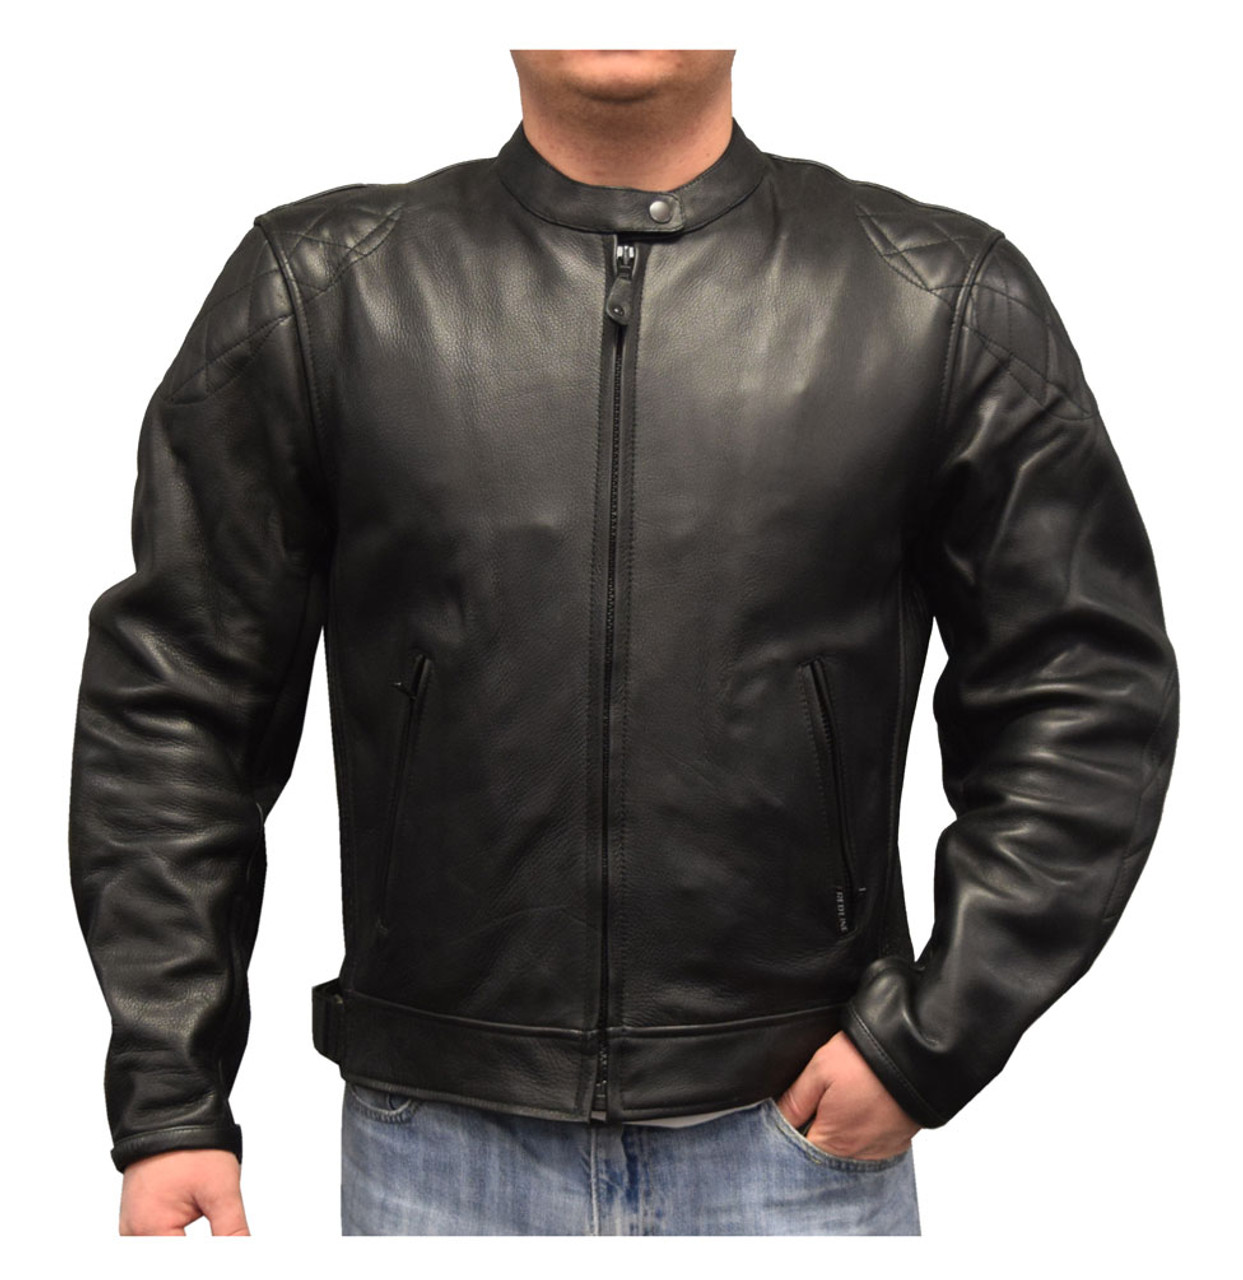 motorcycle jackets with armor men's